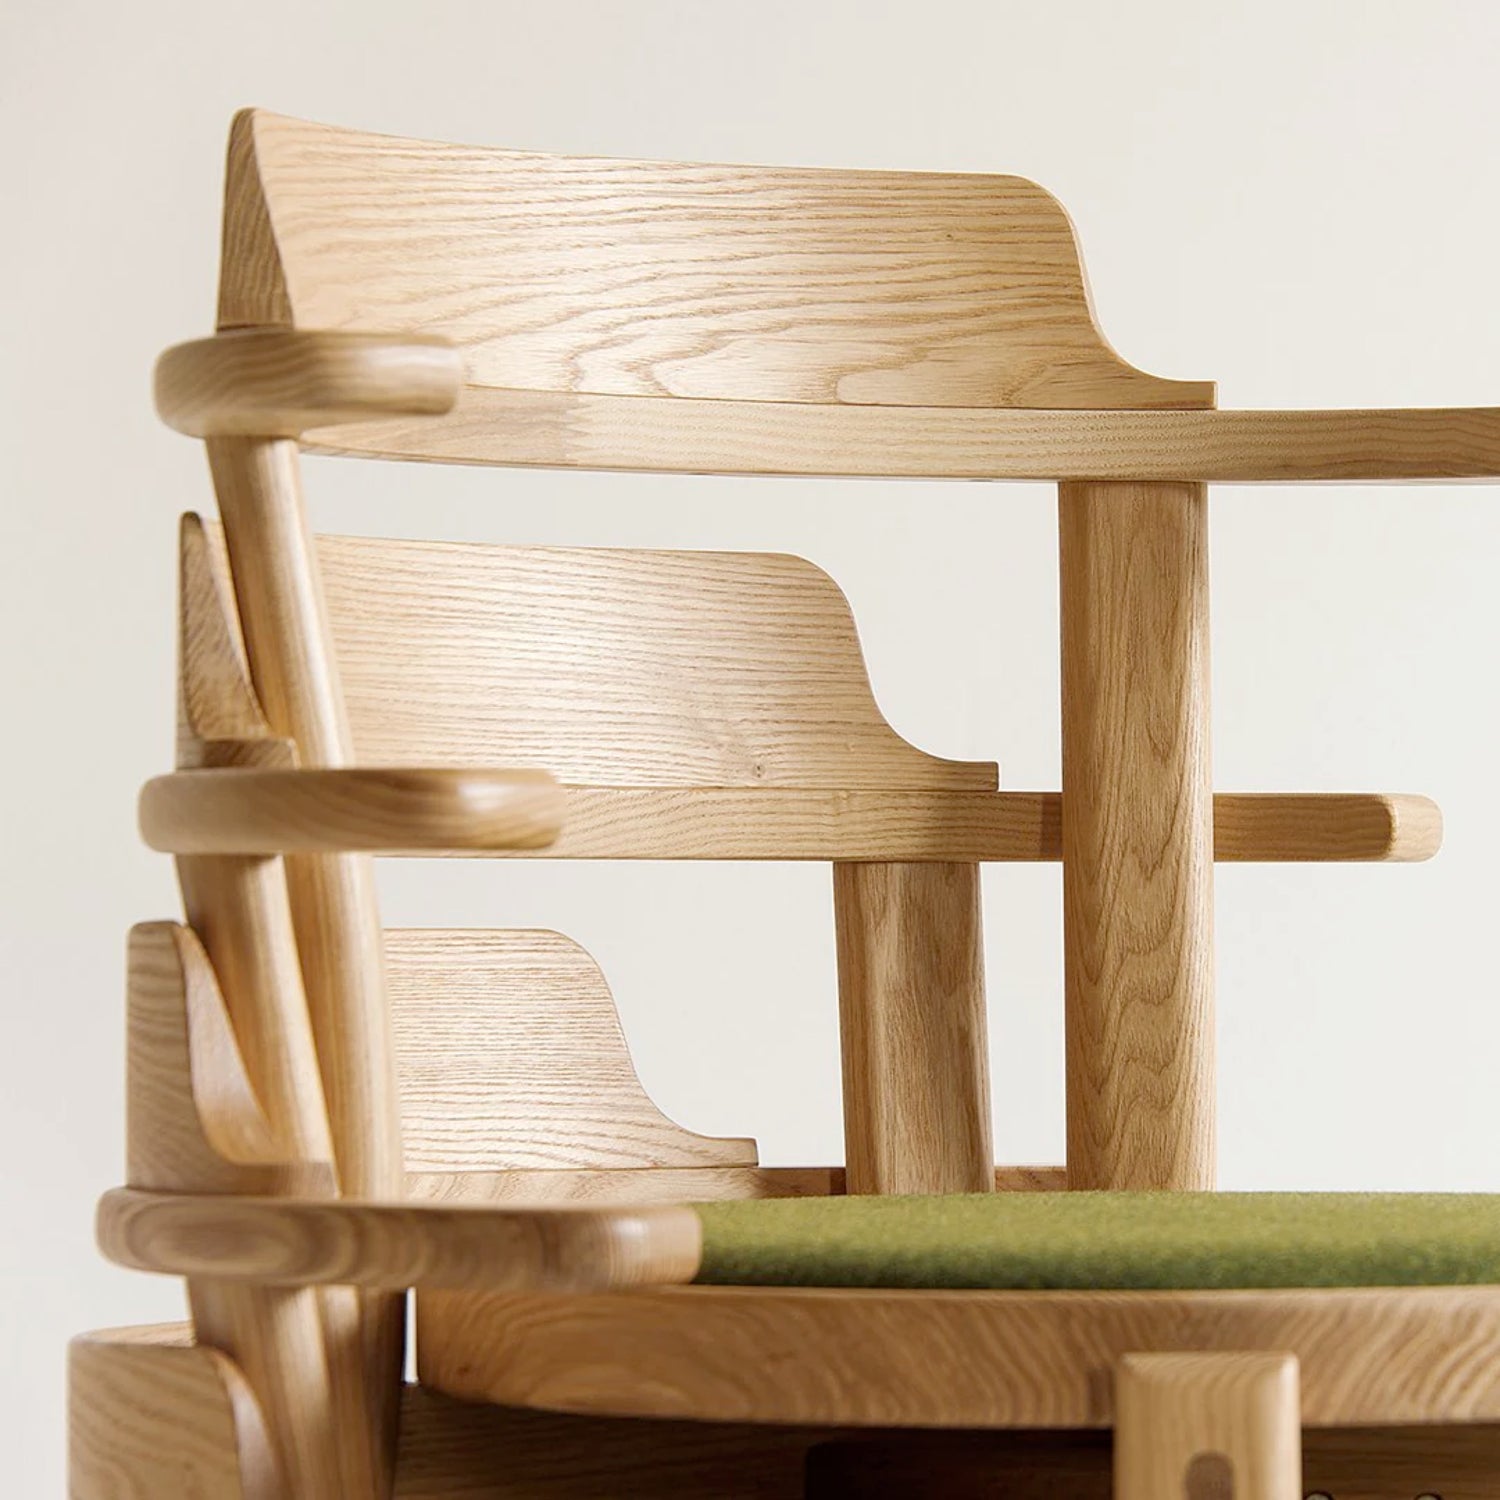 DARBY™ Chair by CondeHouse in Japanese Oak, available at ShopJapandi.com